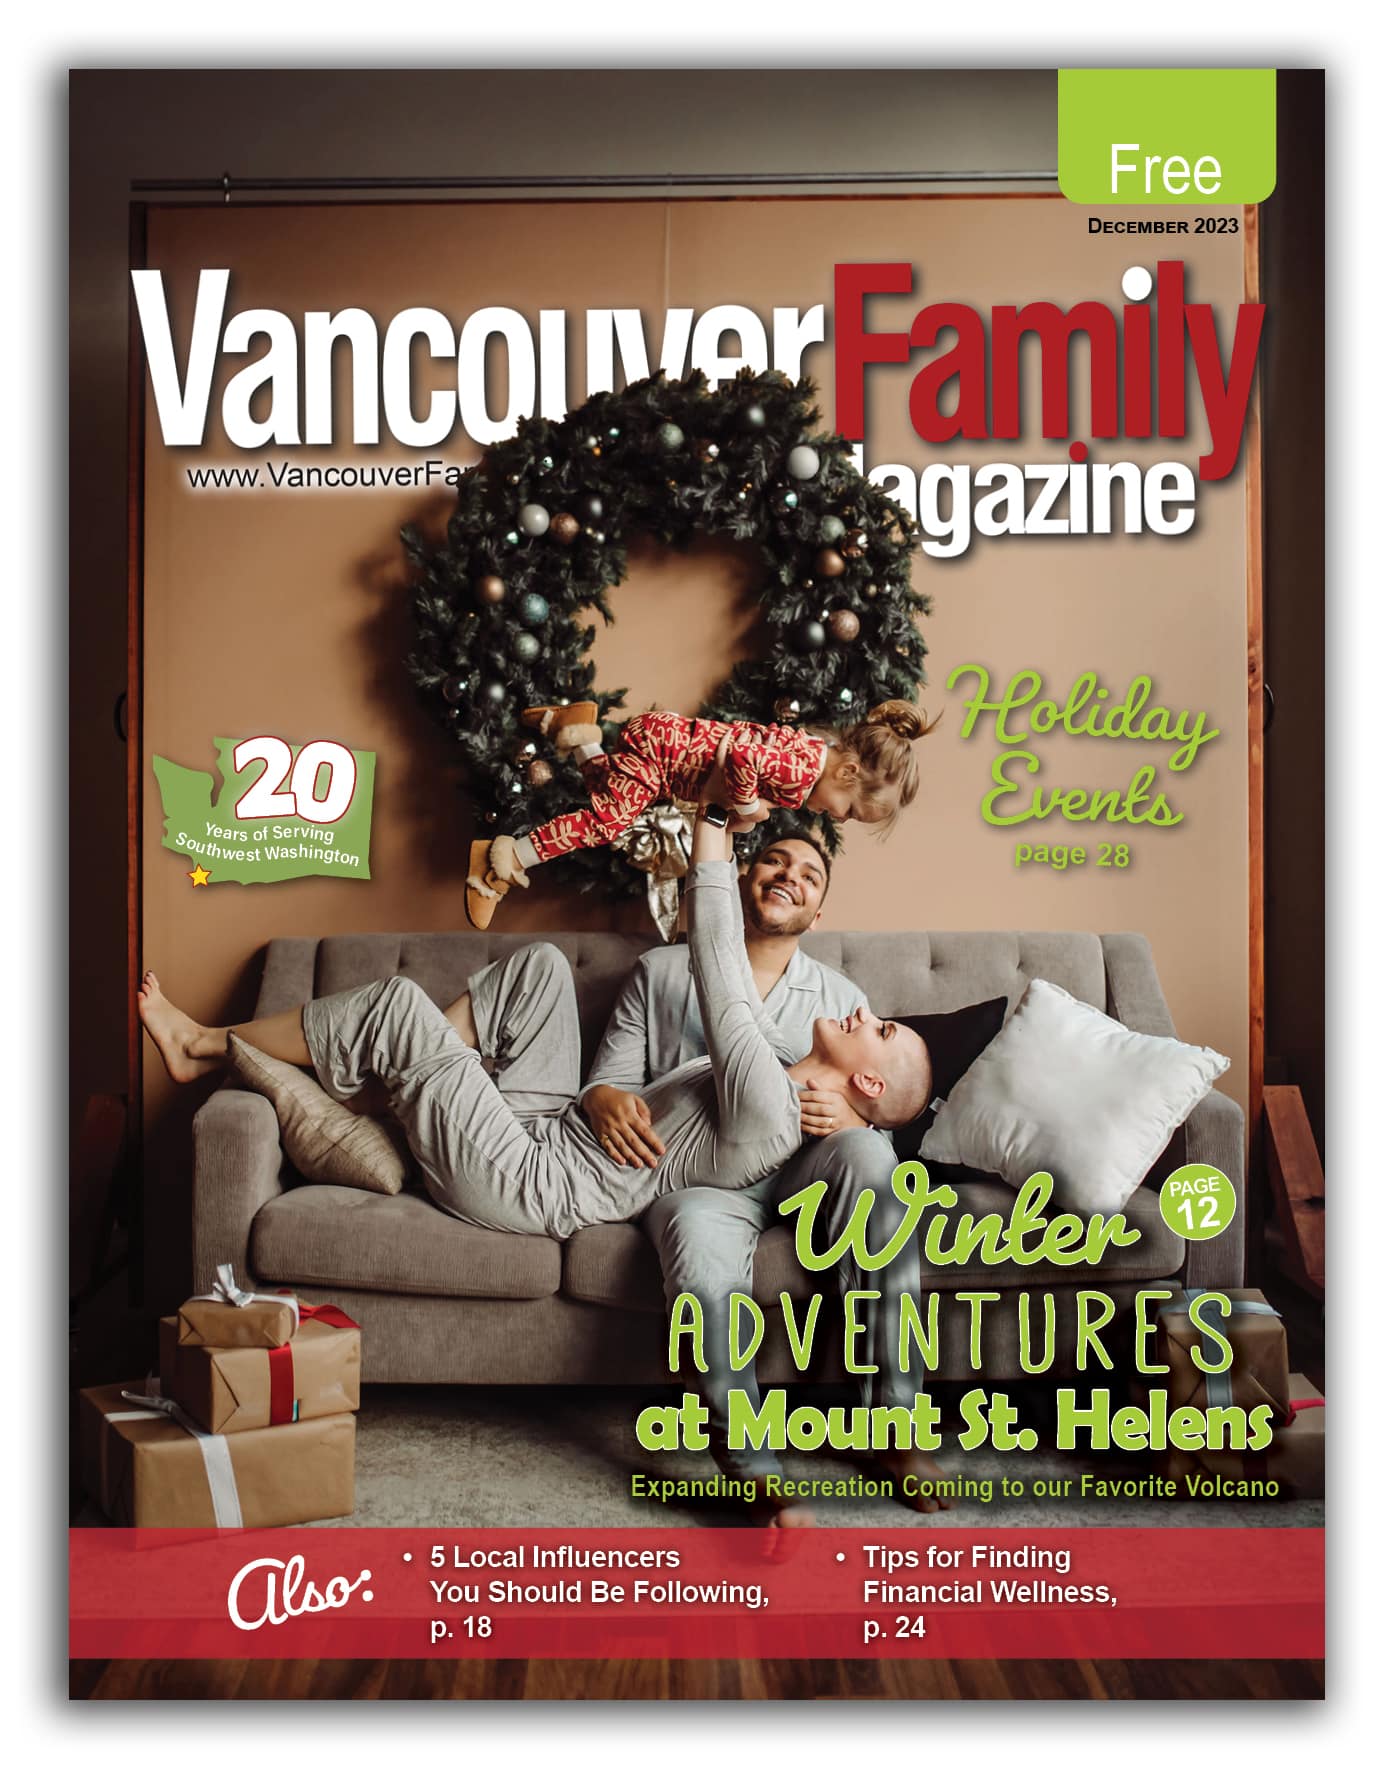 Vancouver Family Magazine December 2023 issue features a family on a couch with a wreath behind them